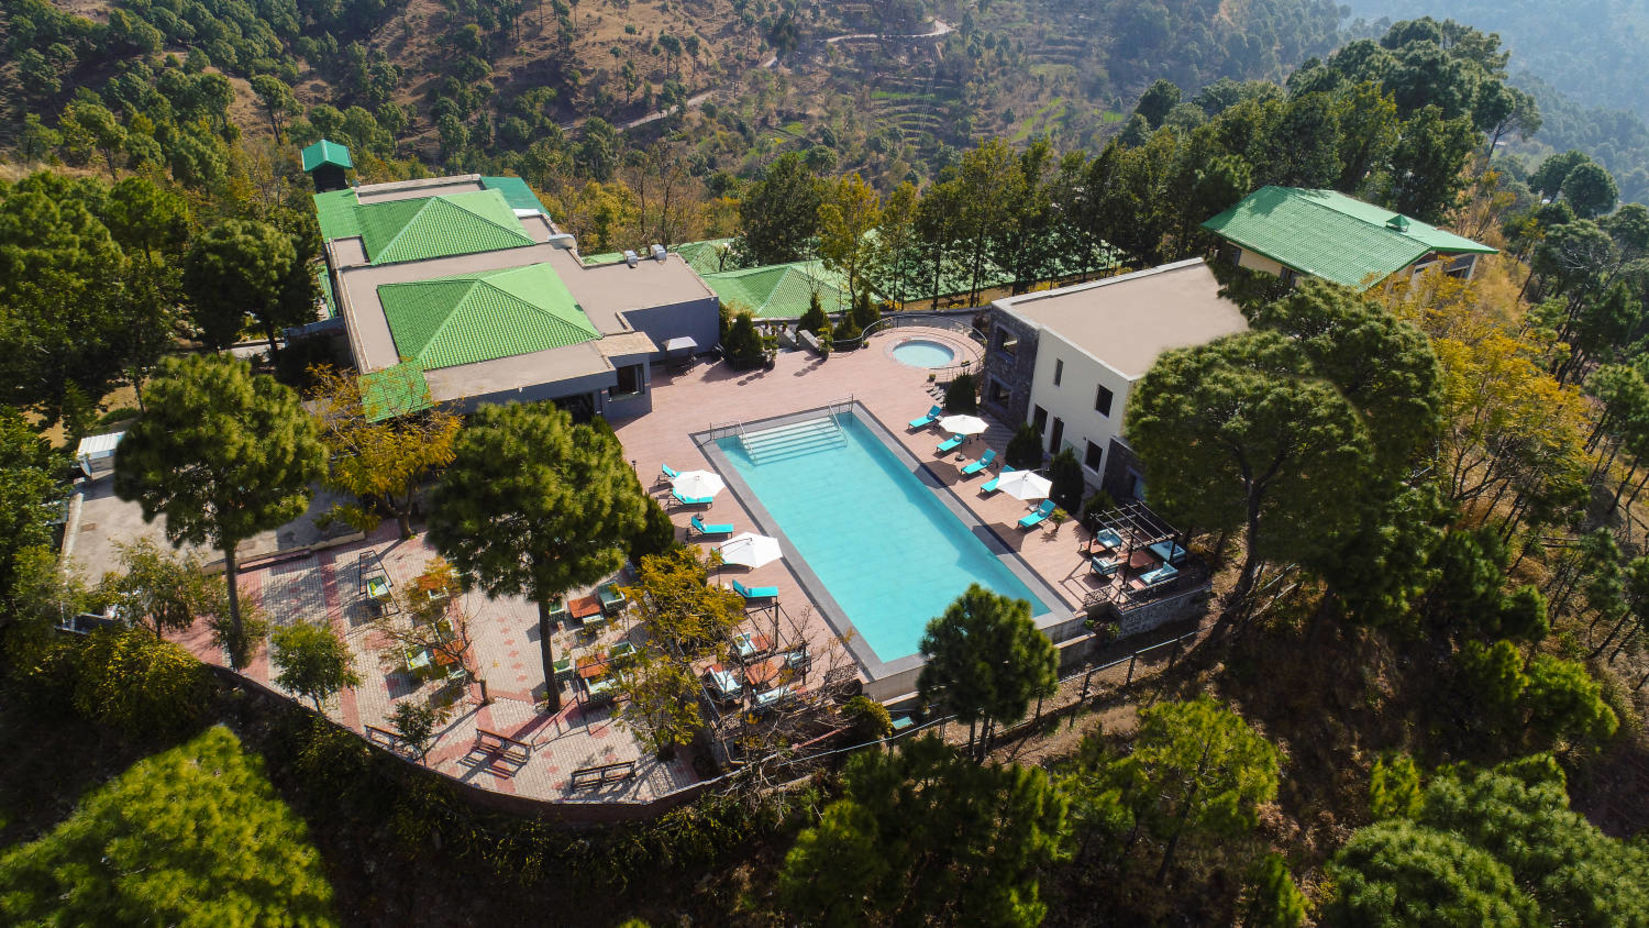 Suryavilas Luxury Resort and Spa - One of the best resorts in Solan